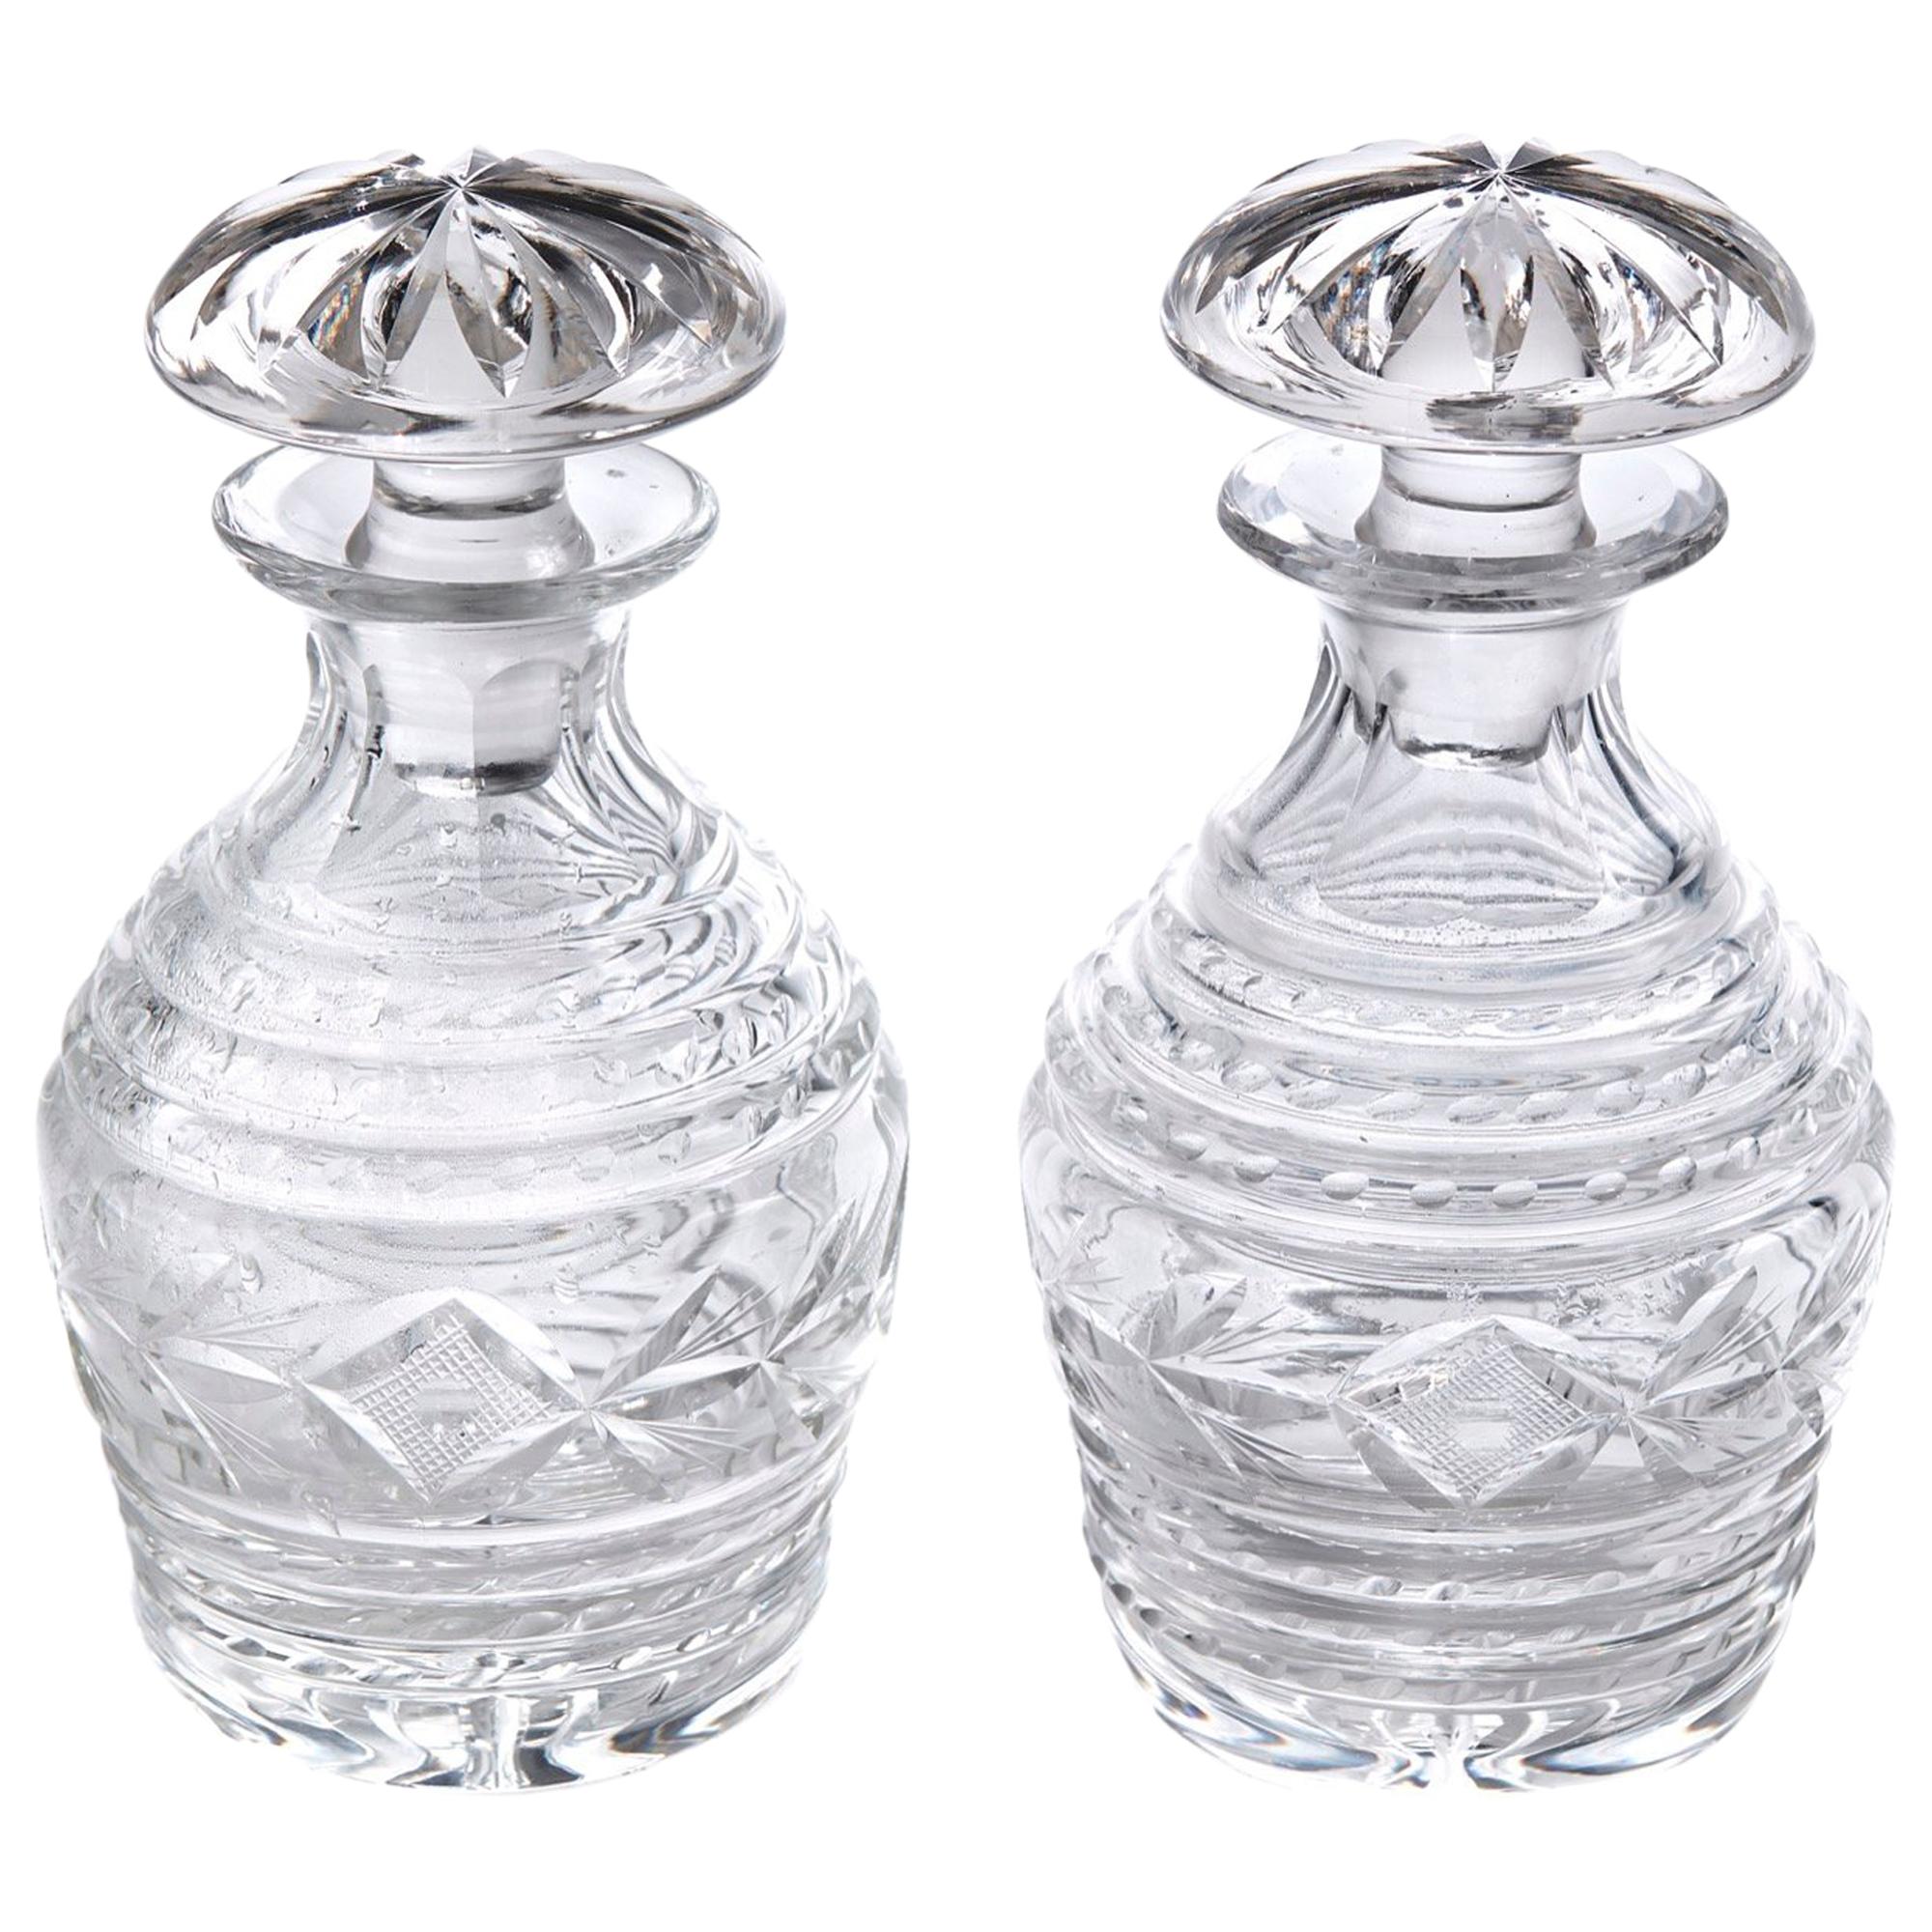 Quality Pair of Antique Cut Glass Crystal Decanters For Sale